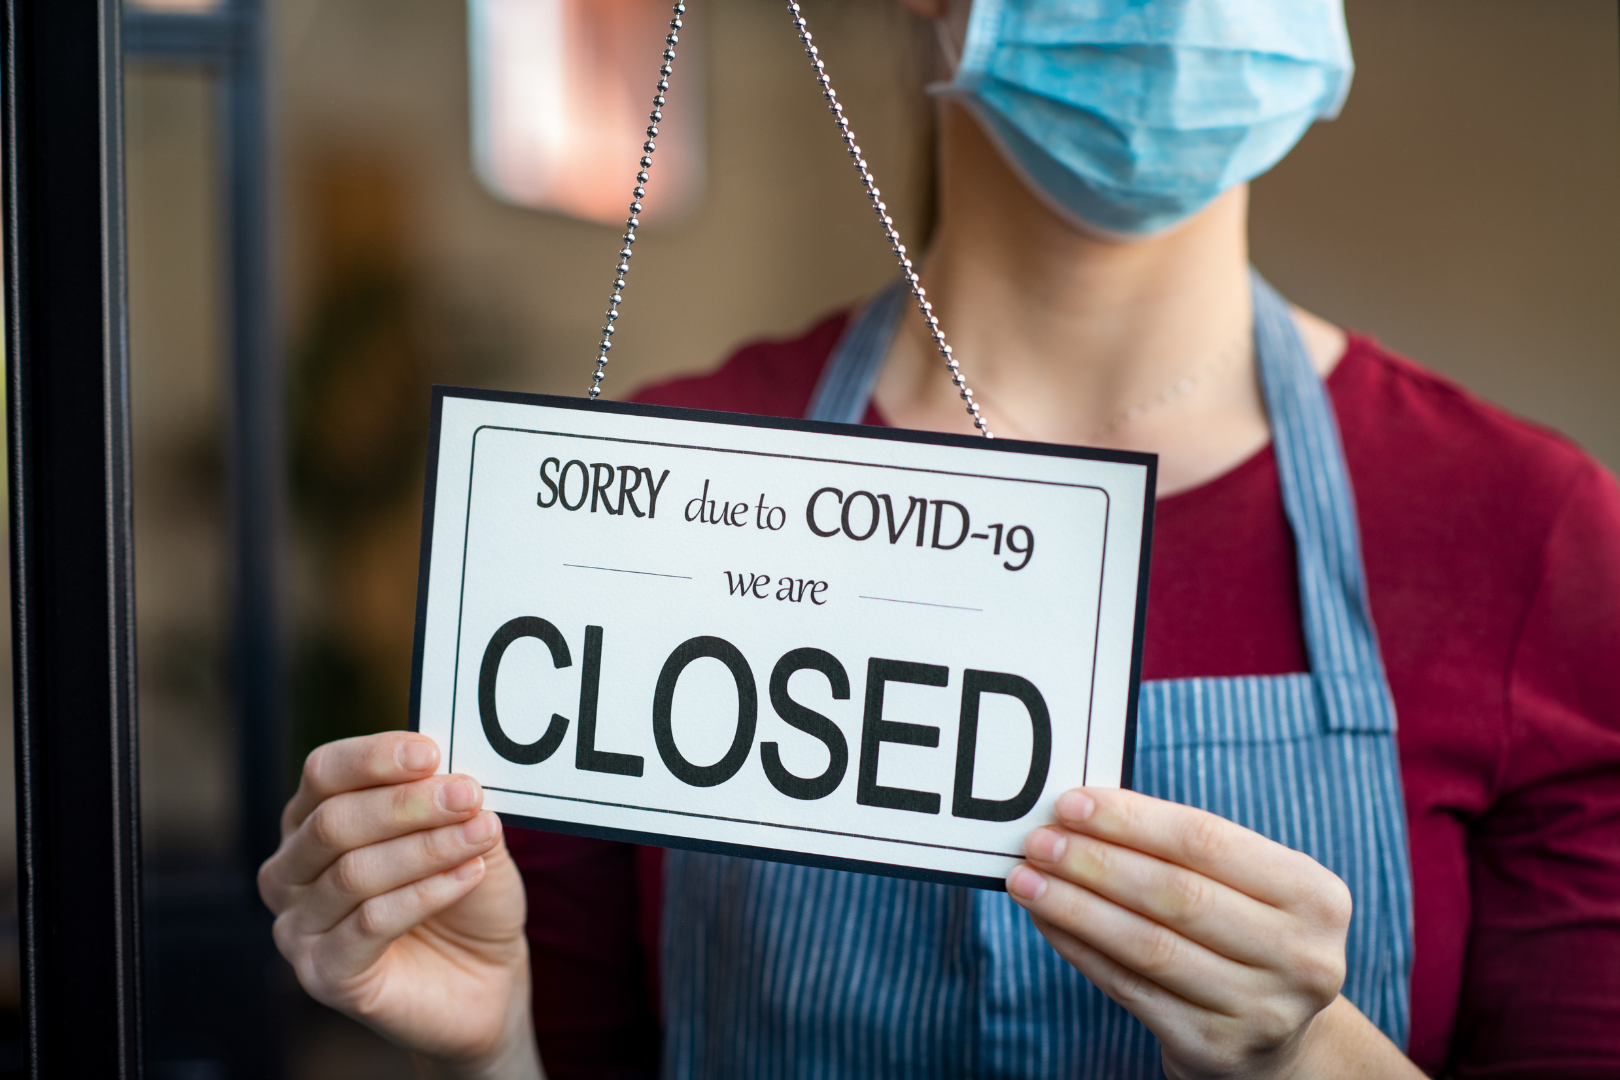 the pandemic forced many businesses to close